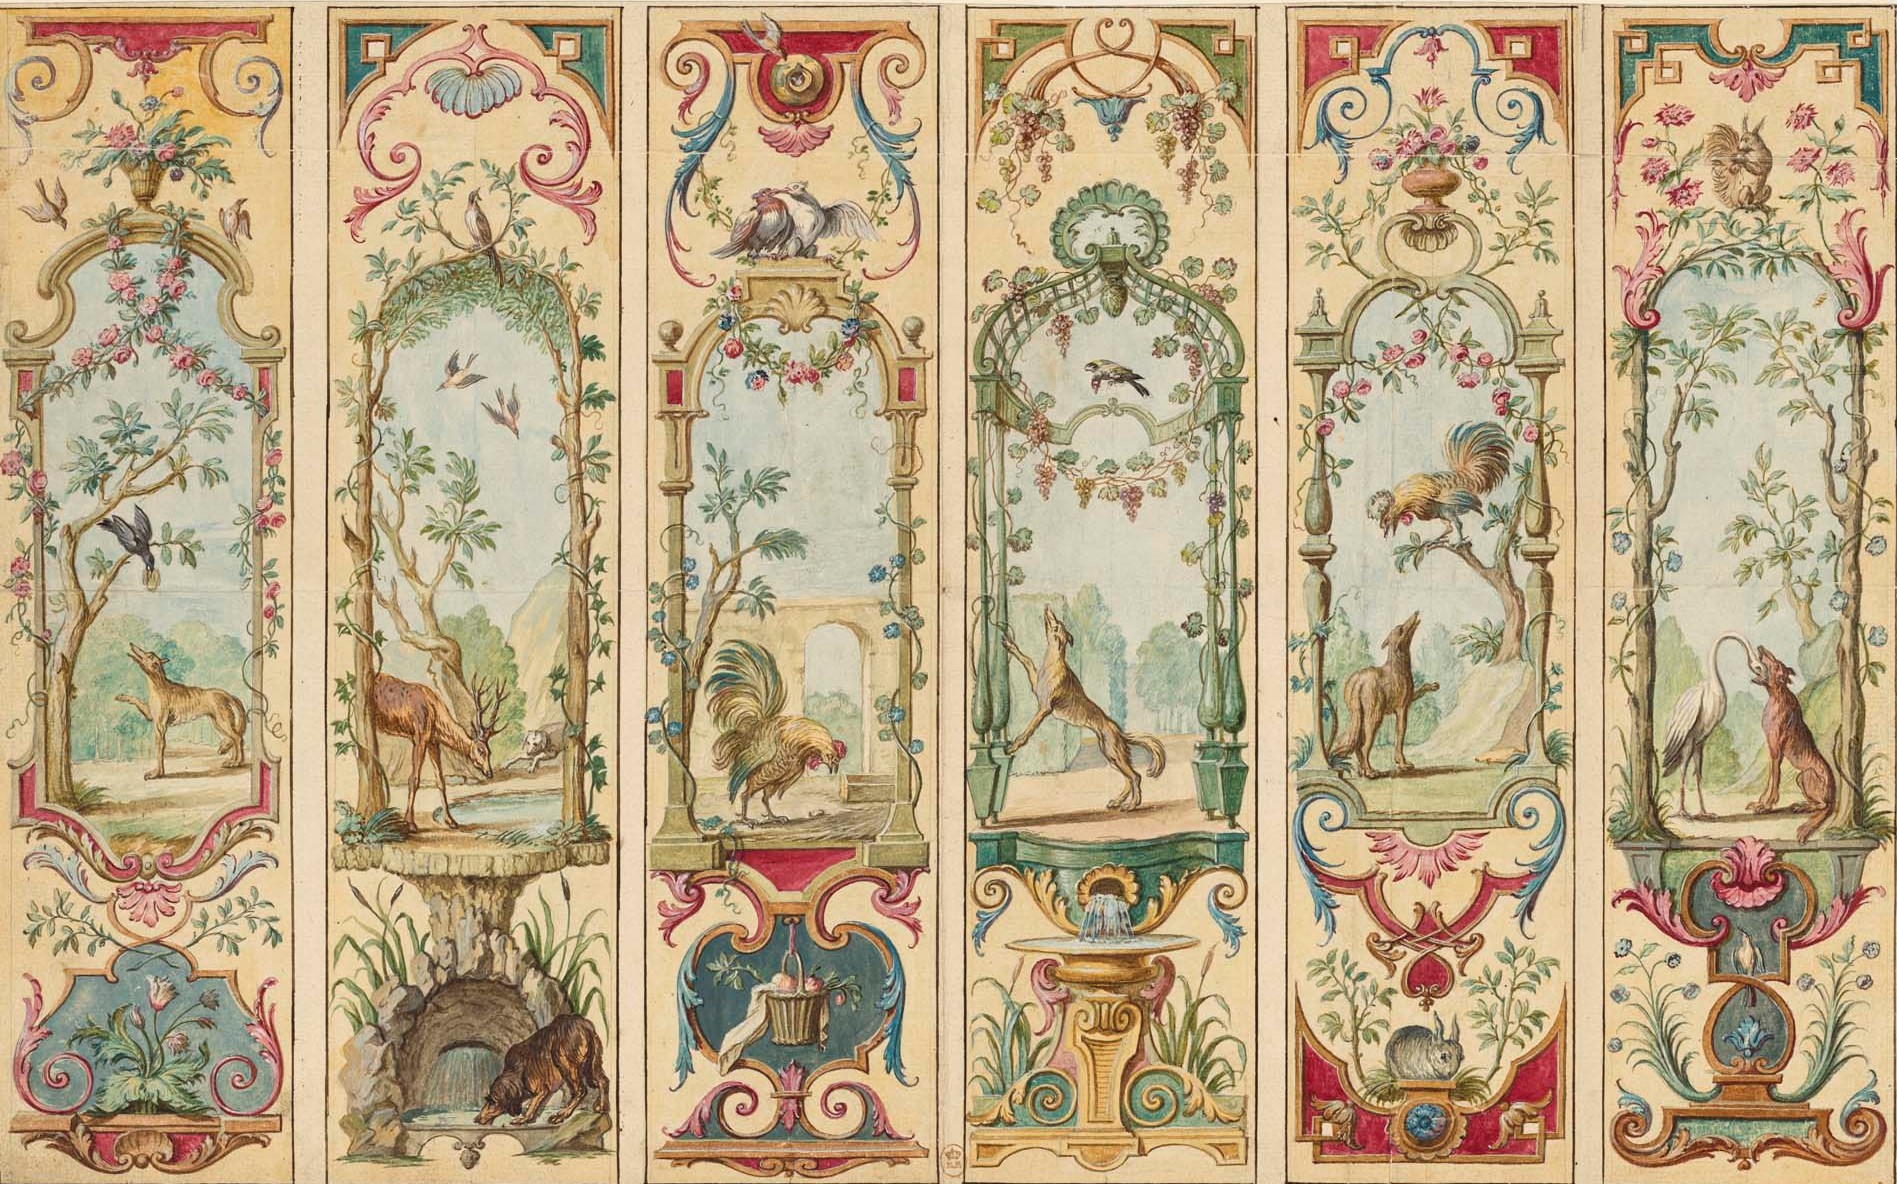 A drawing for a proposed folding screen shows twining vines, birds and animals.